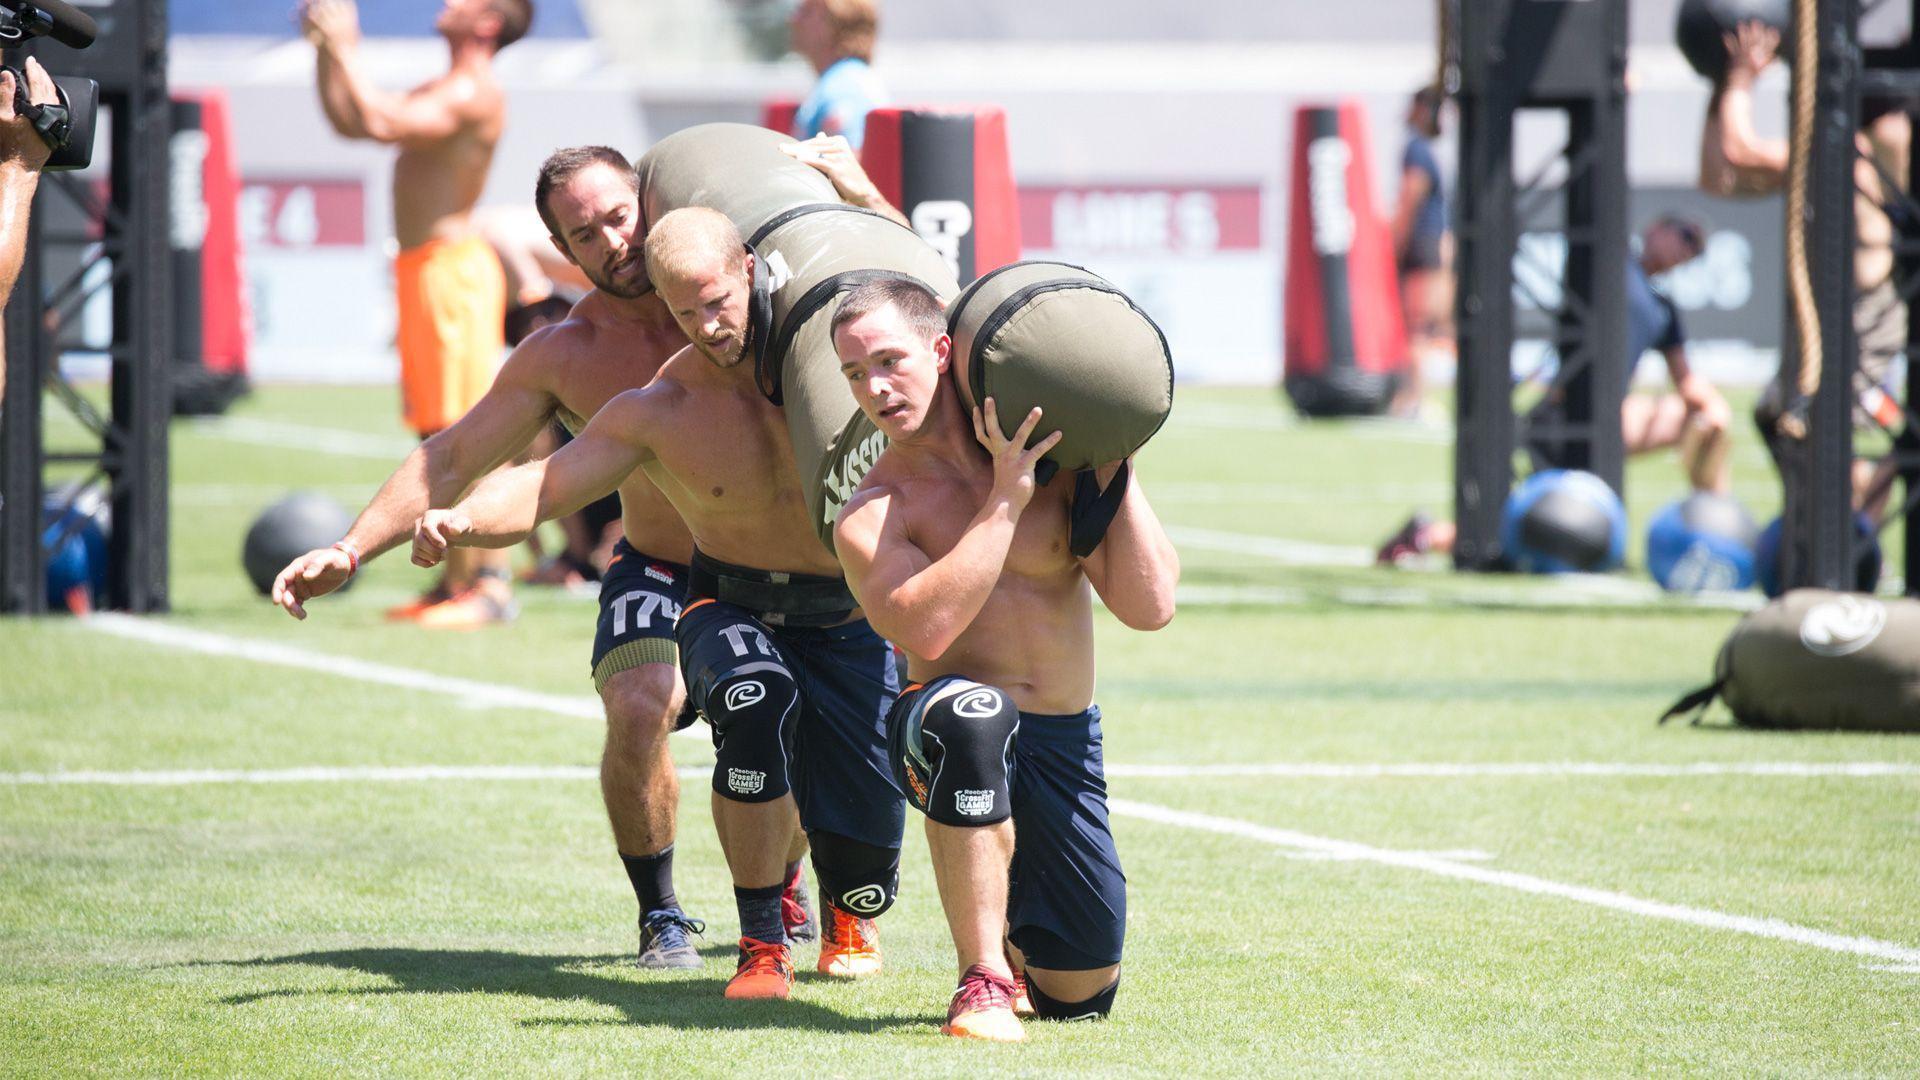 Photo that Sum Up the 2015 Reebok CrossFit Games